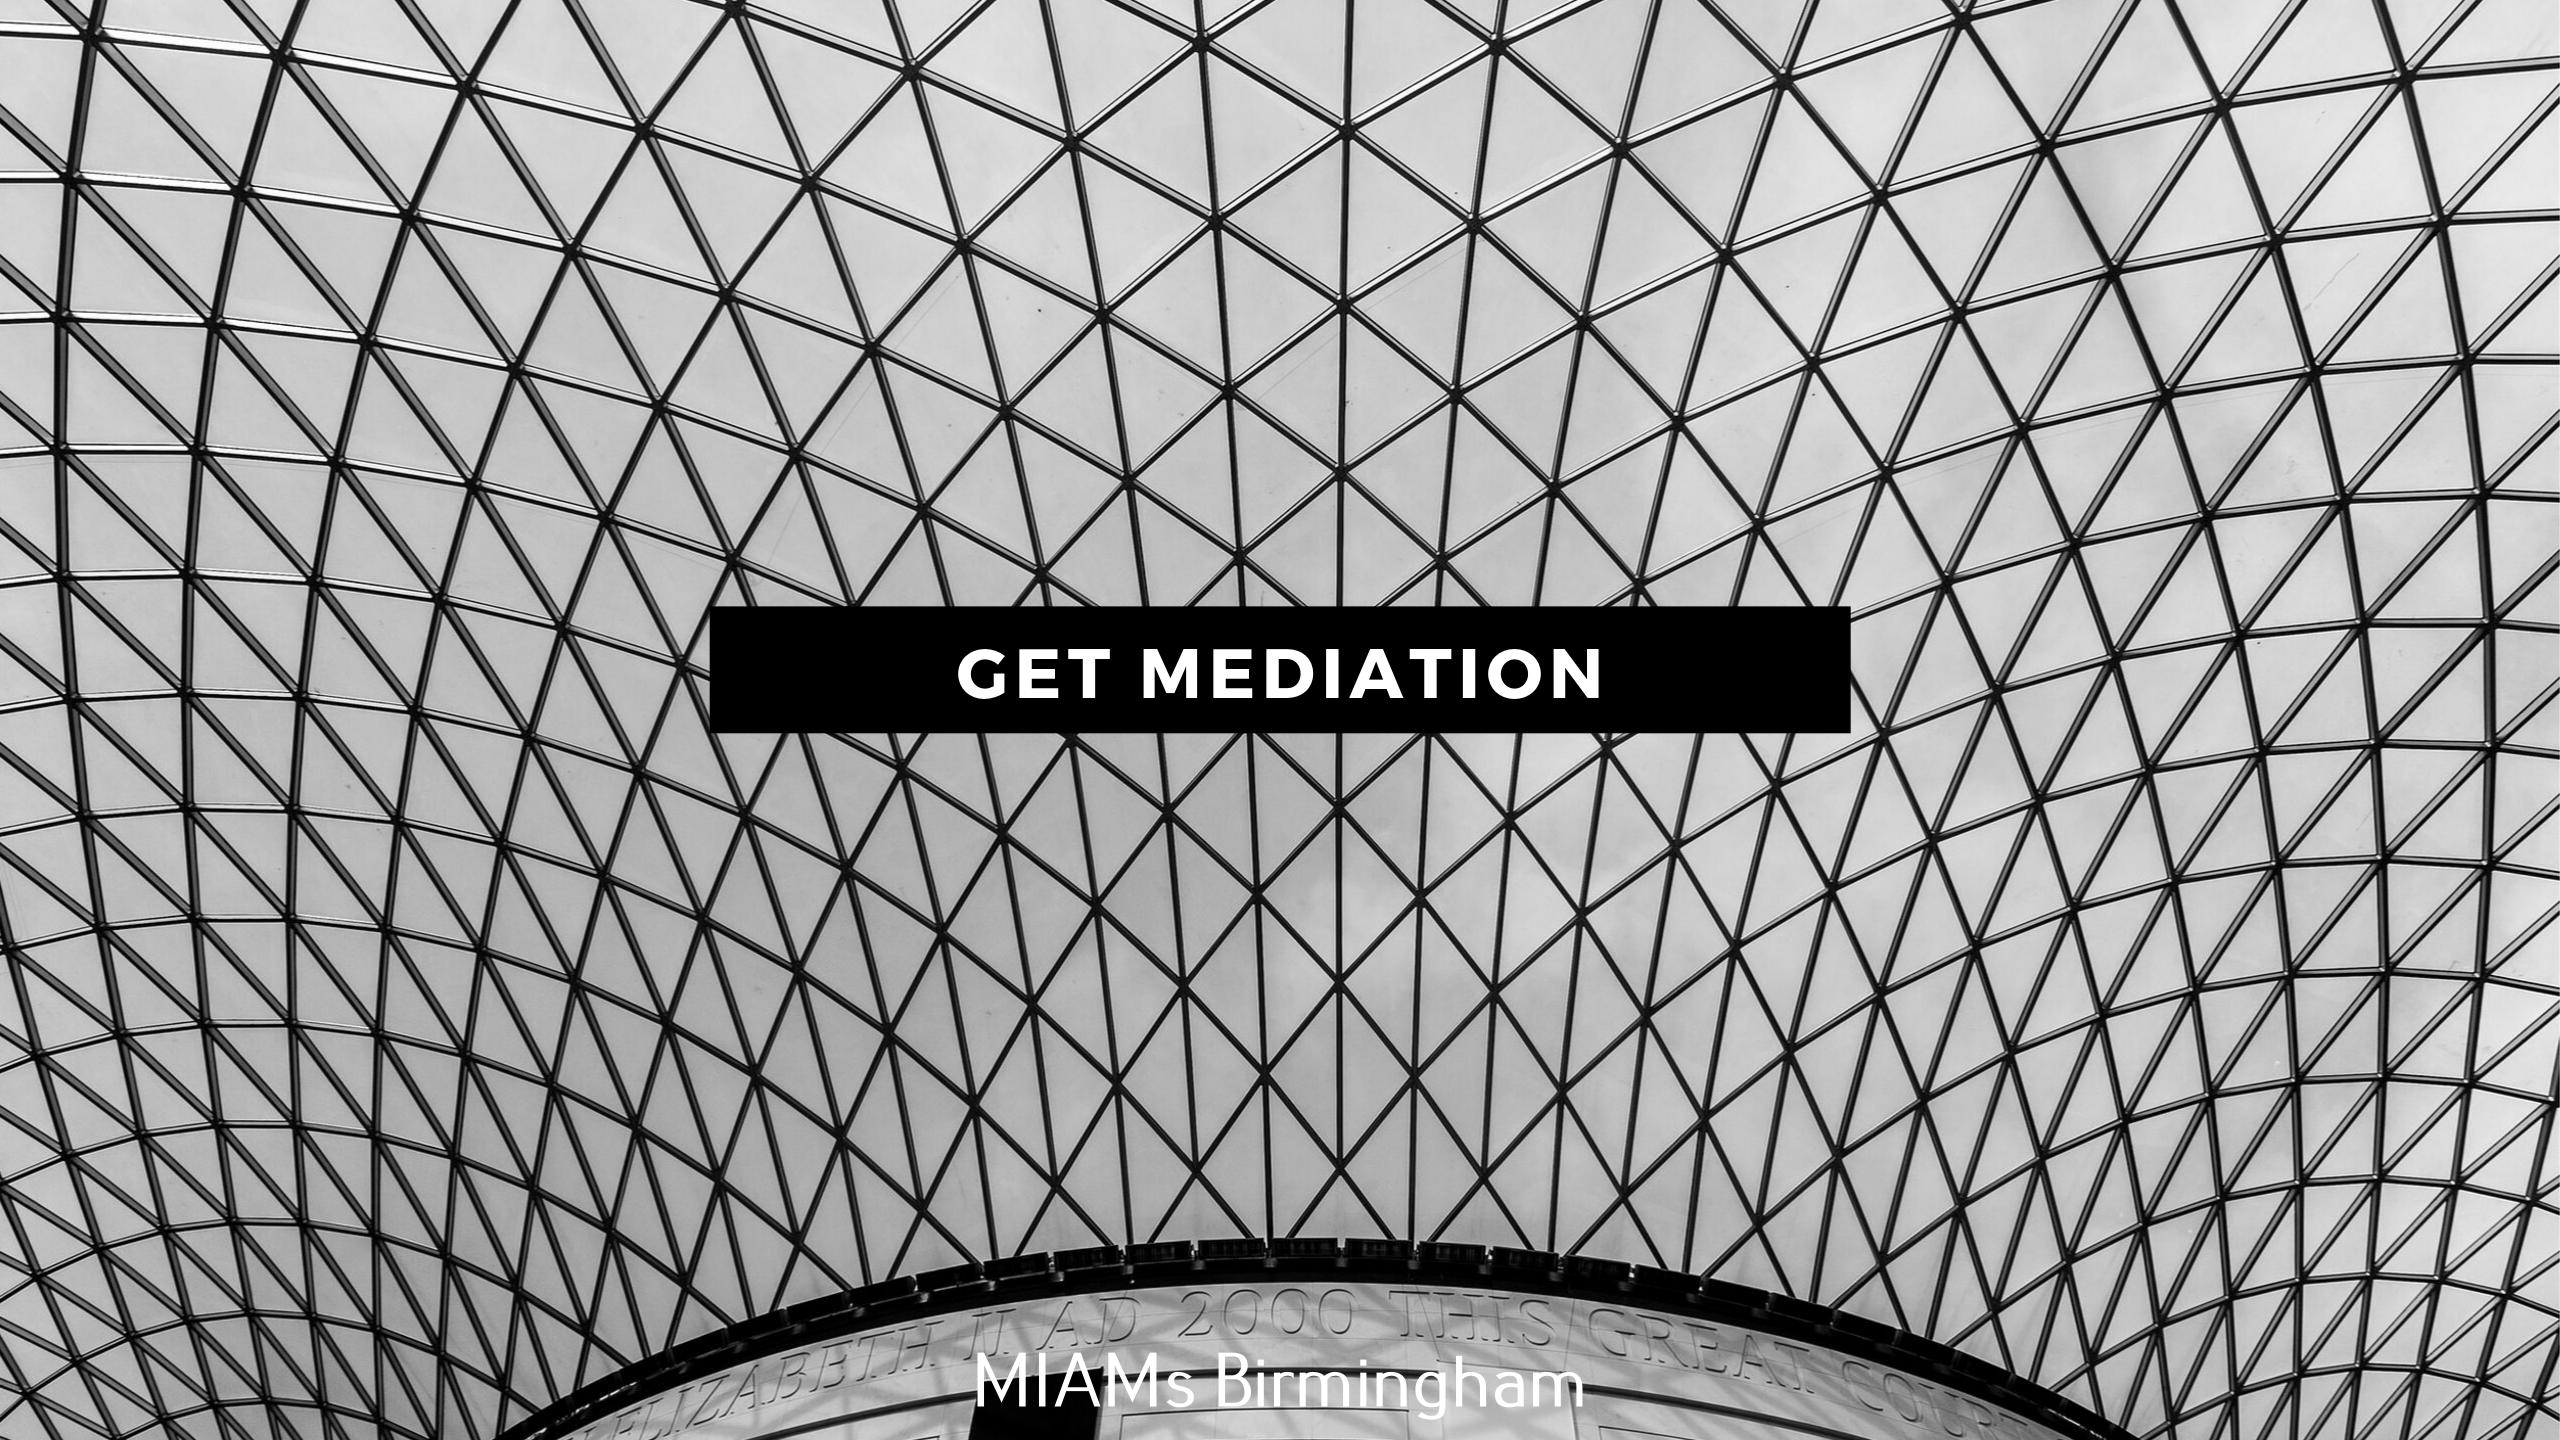 GetMediation Birmingham has A 90% Success Rate For their Client's Mediation Services.